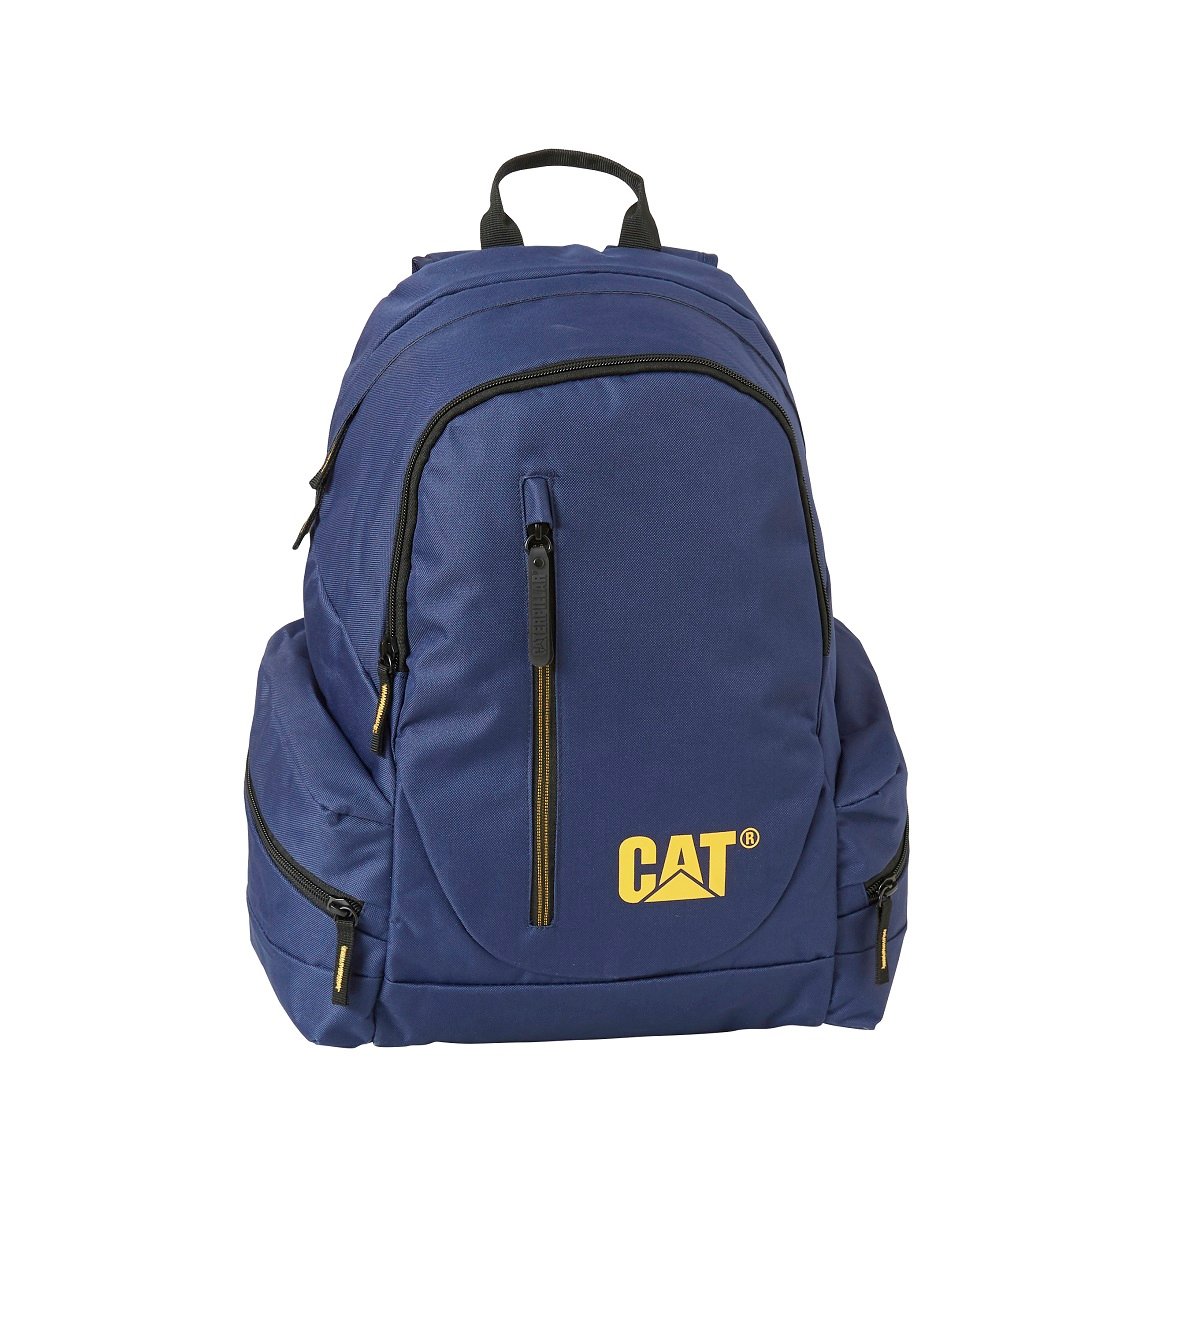 CAT -  The Project Backpack - Blue (83541-184)